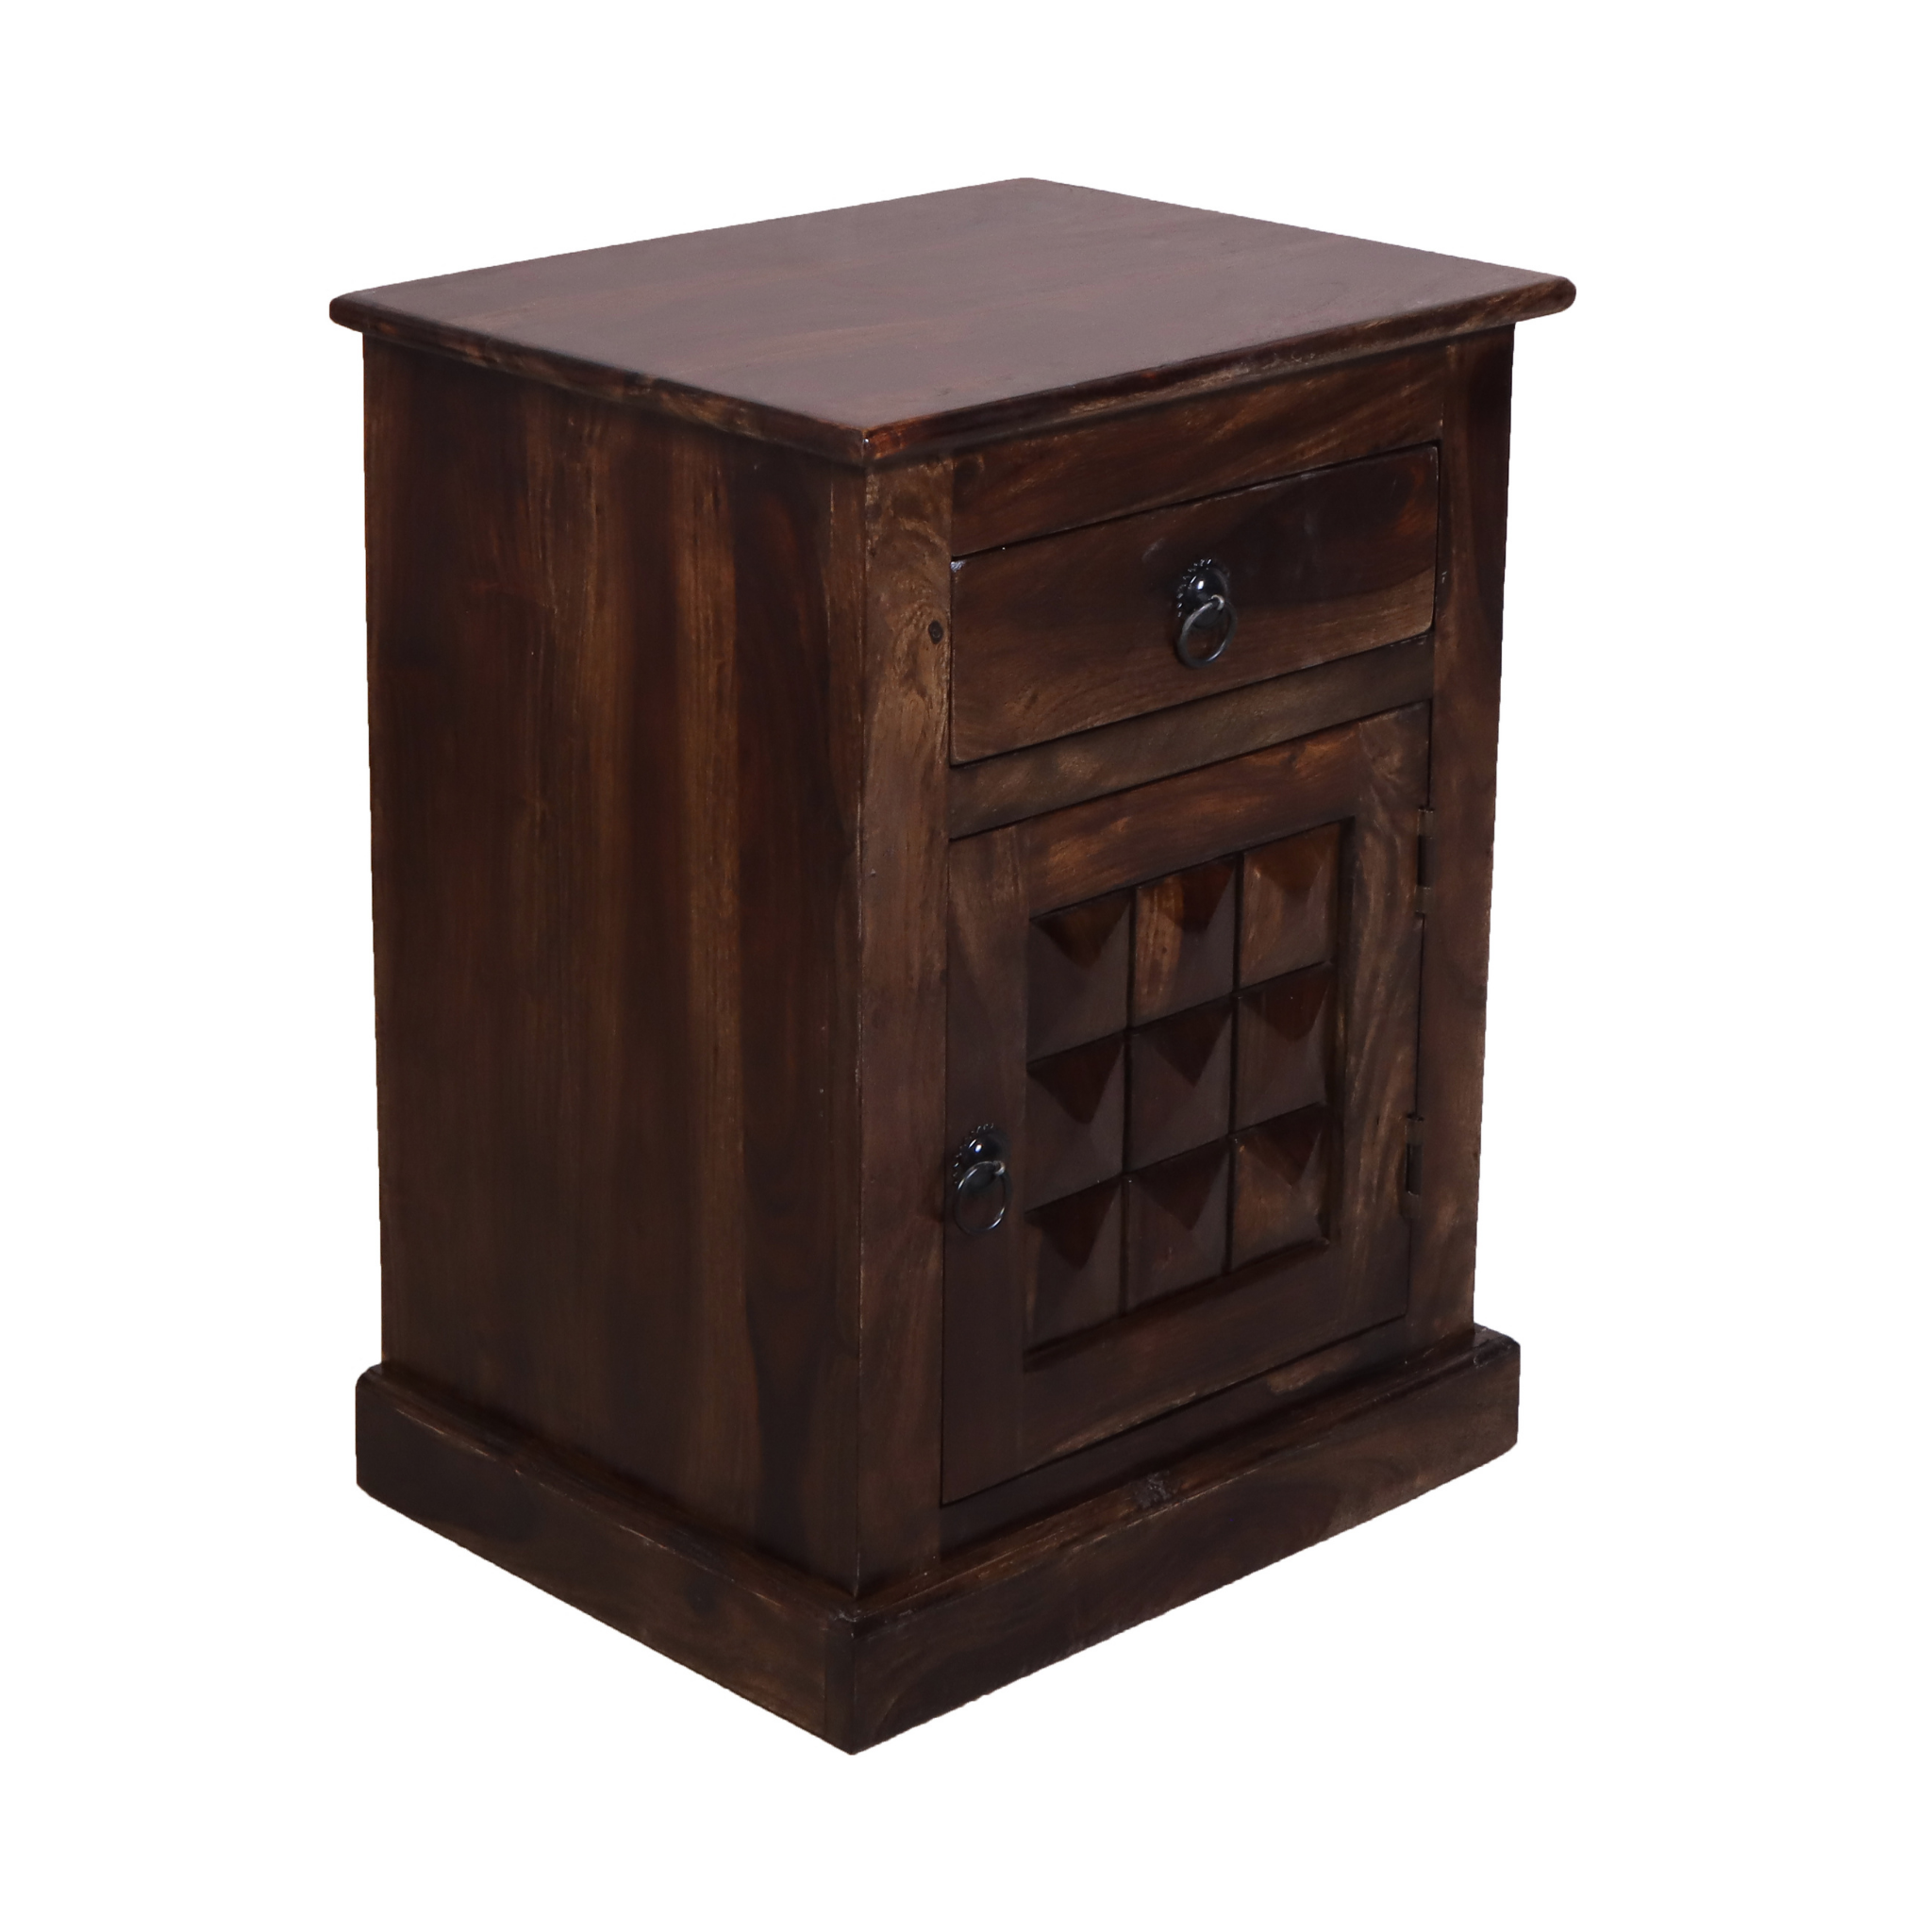 Diamond Bedside Table with One Drawer